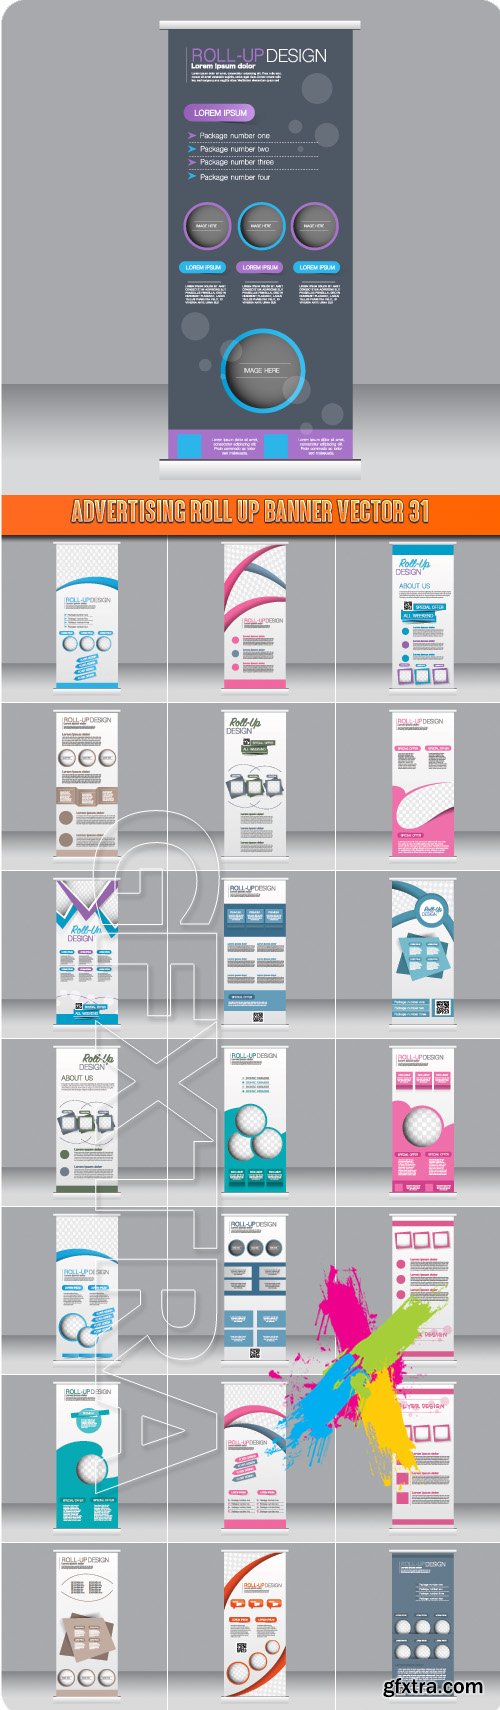 Advertising Roll up banner vector 31